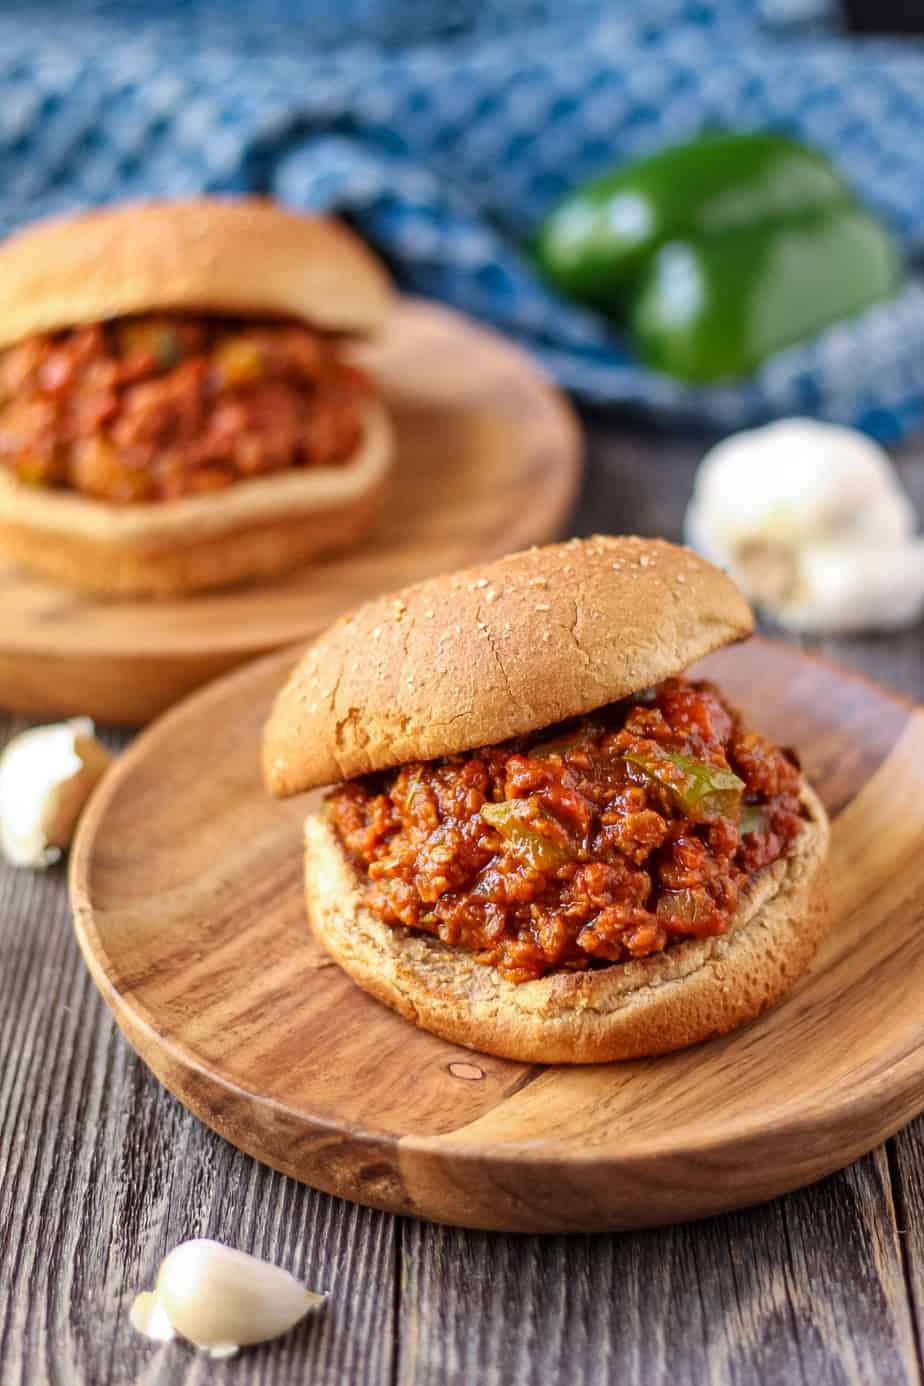 vegetarian sloppy joes on wooden plates with blue towel in background.